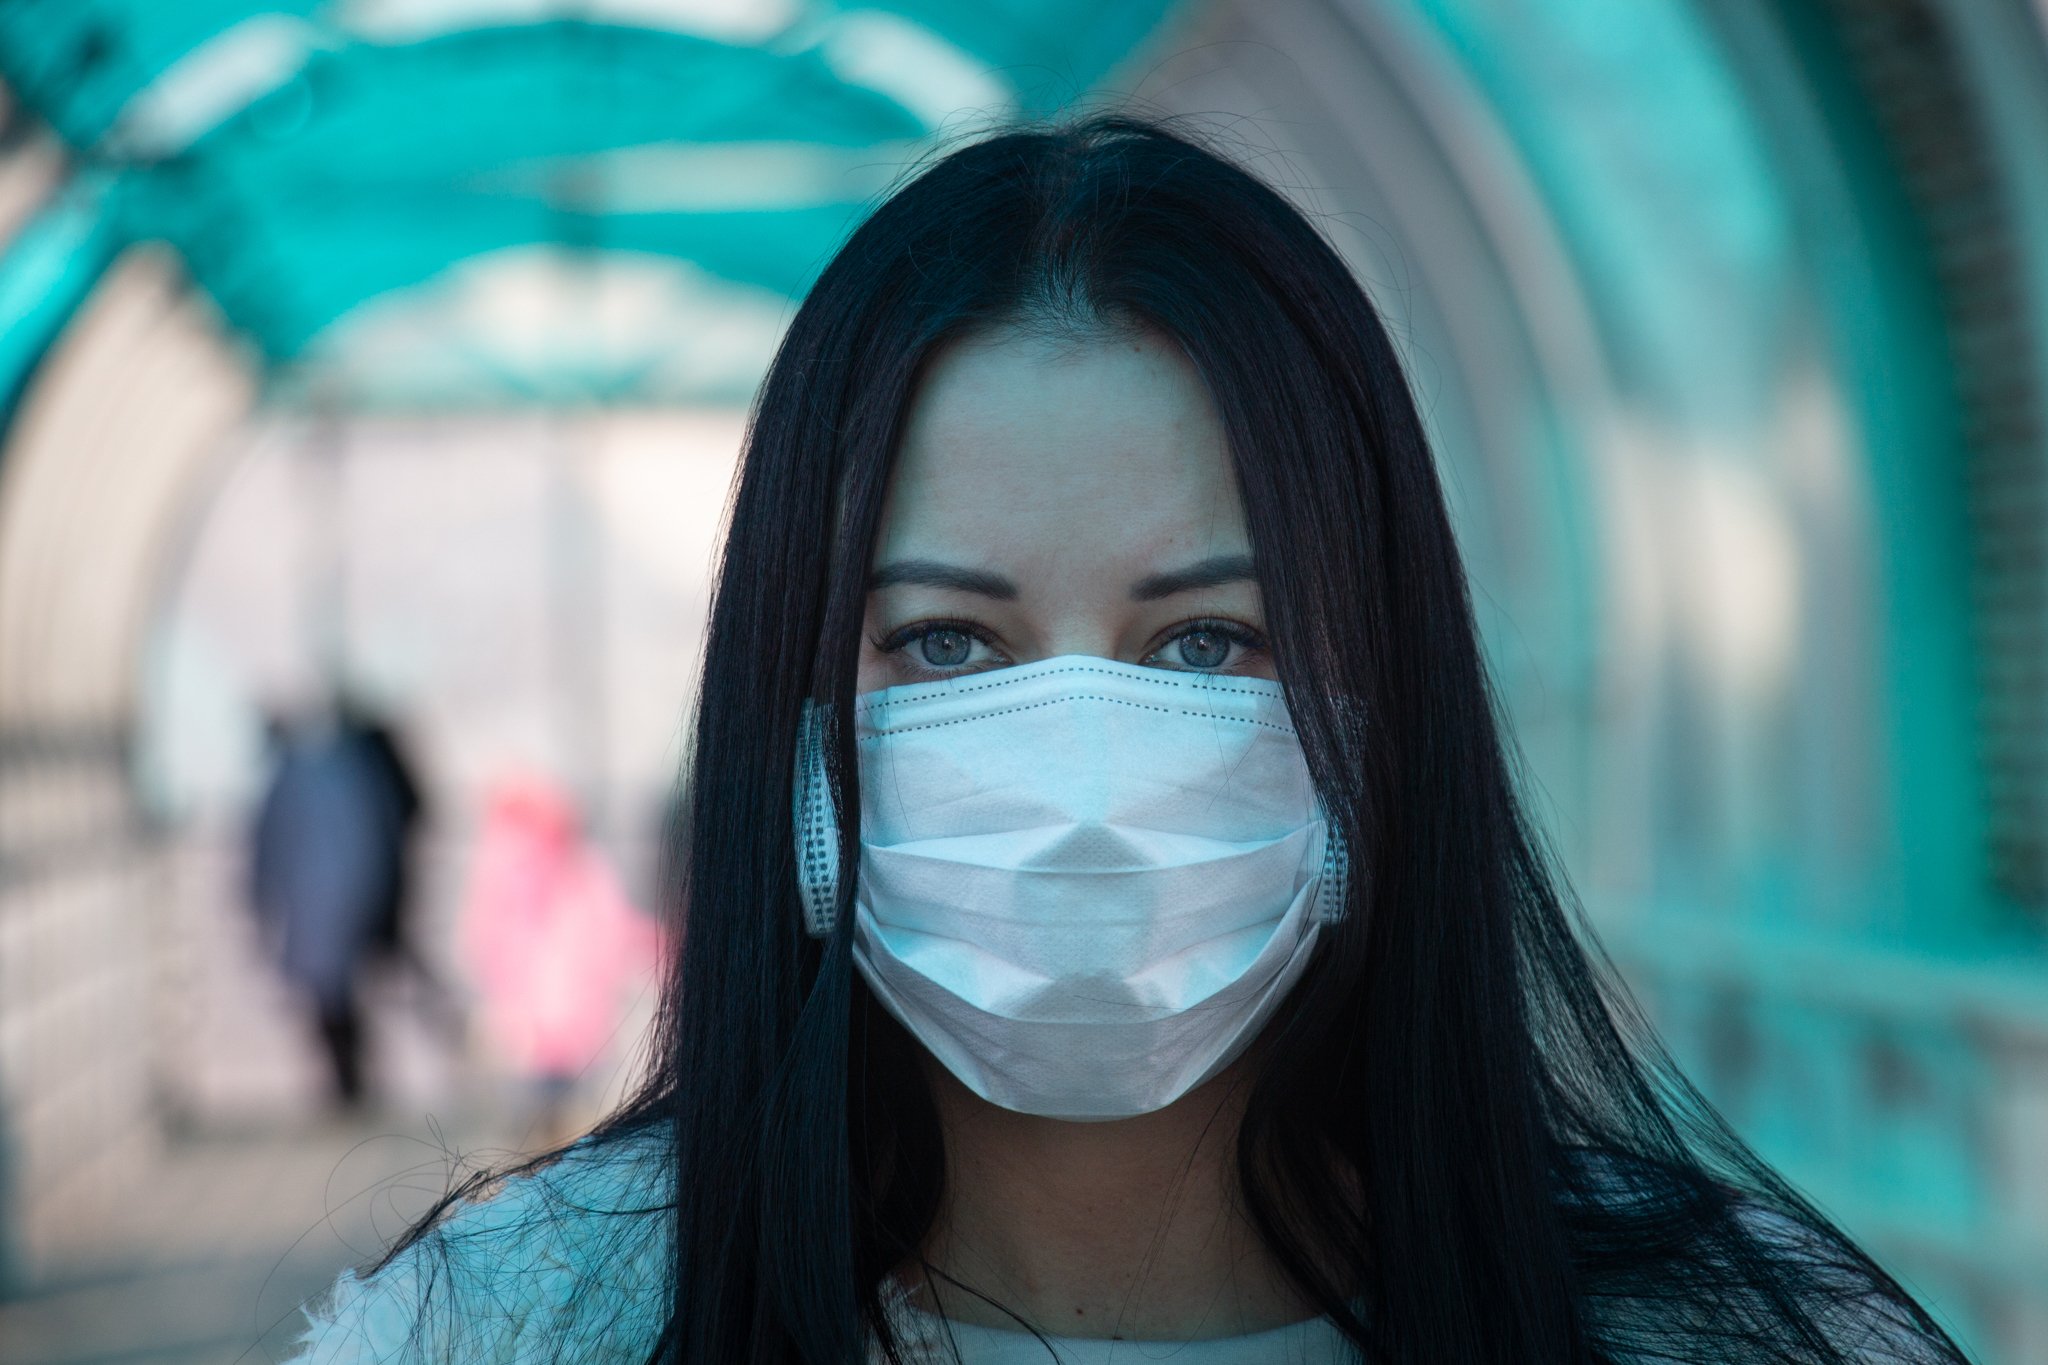 Woman in a medical mask on the street during the coronavirus epidemic in Russia on March 18, 2020 | Photo: Wikimedia